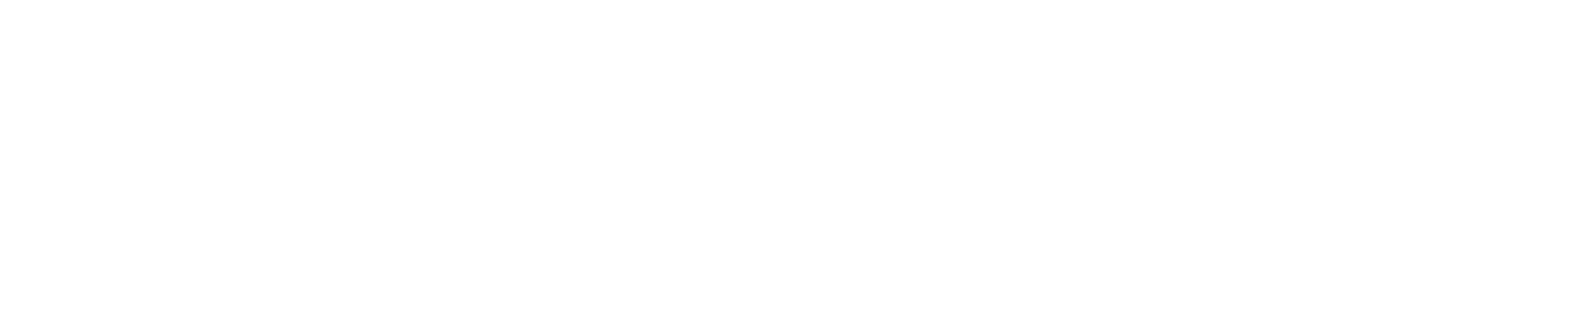 PageGroup logo large for dark backgrounds (transparent PNG)